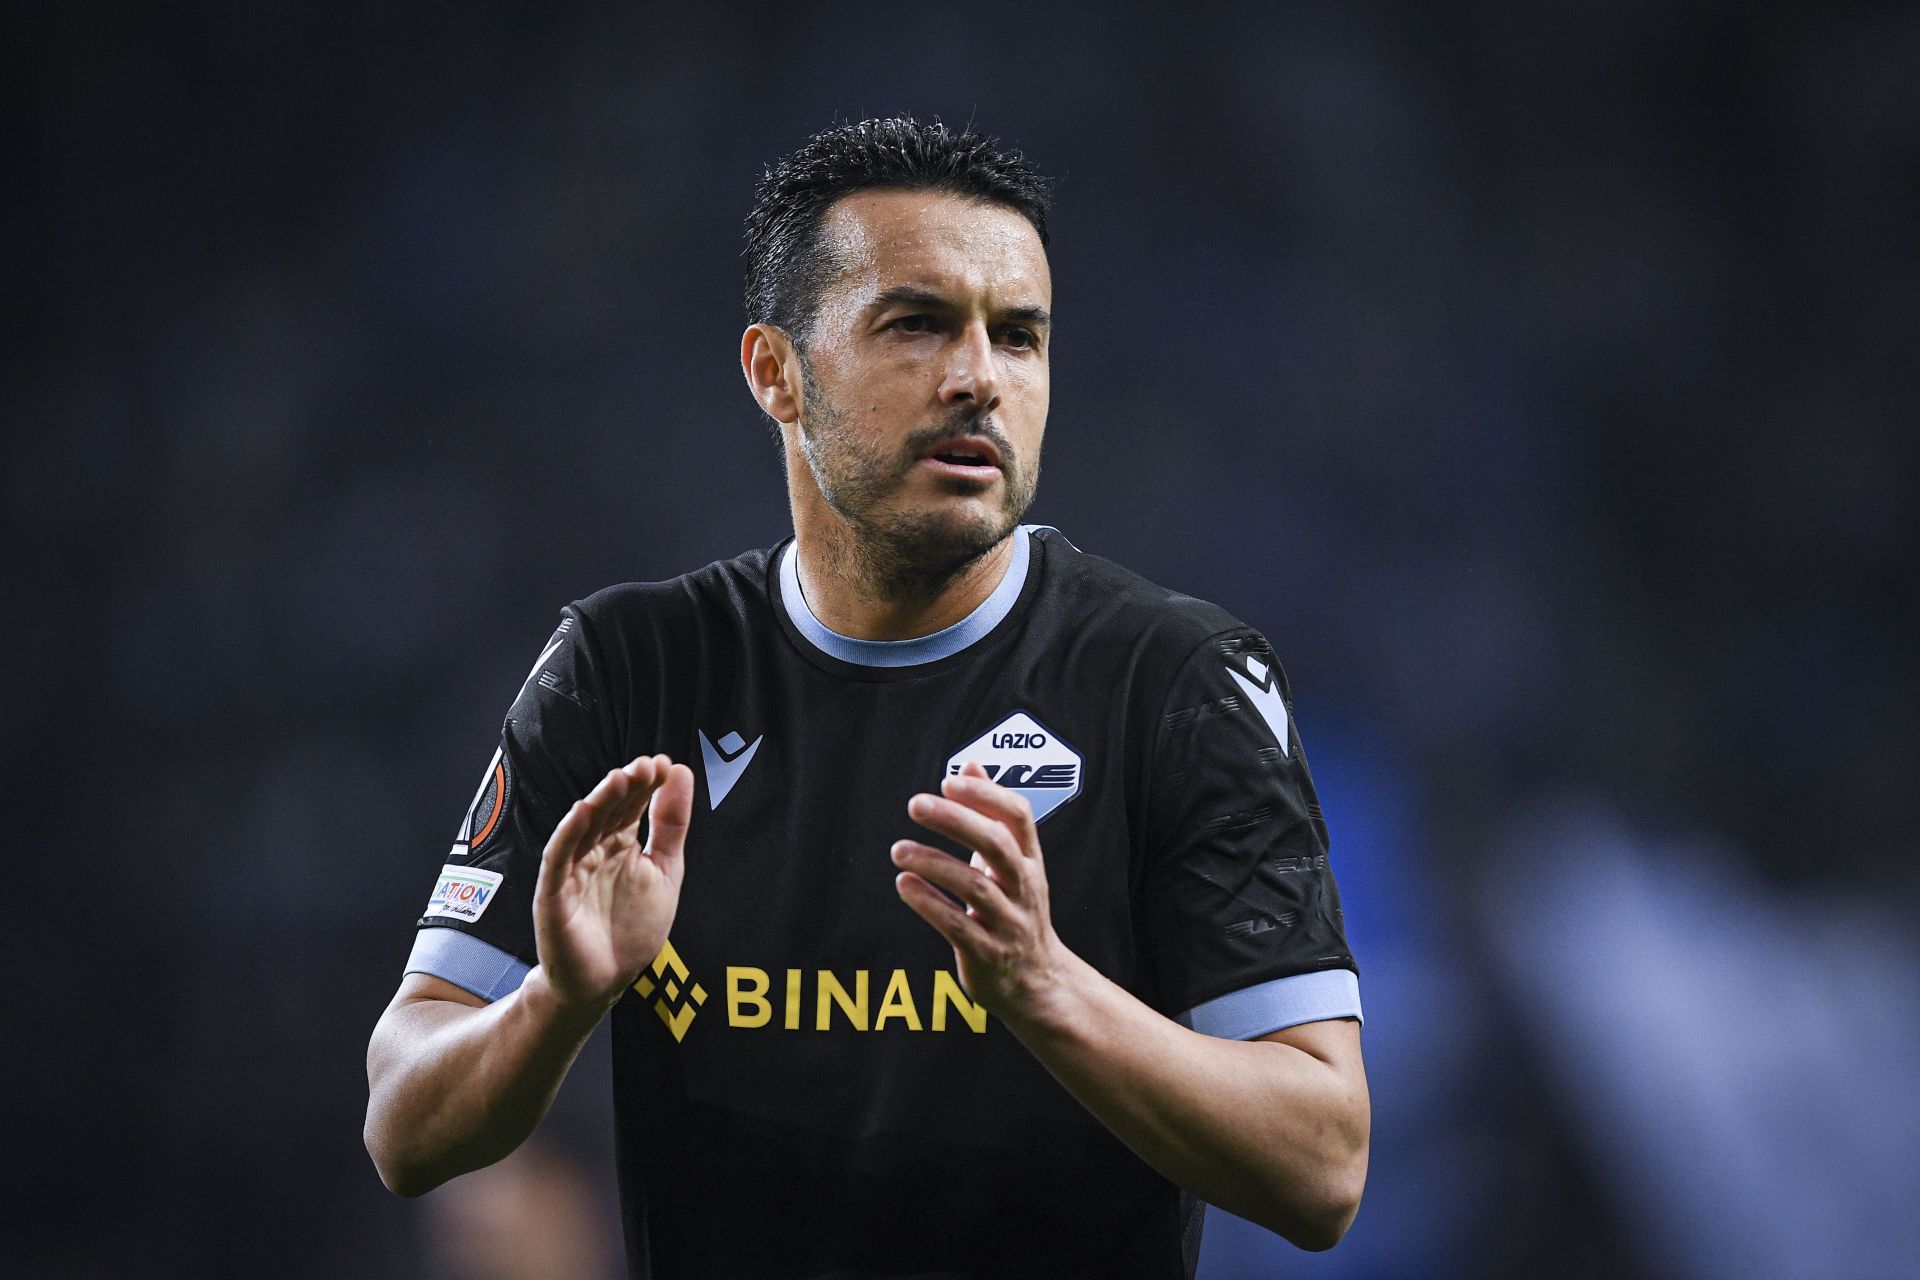 Pedro has won 20 trophies with Barcelona